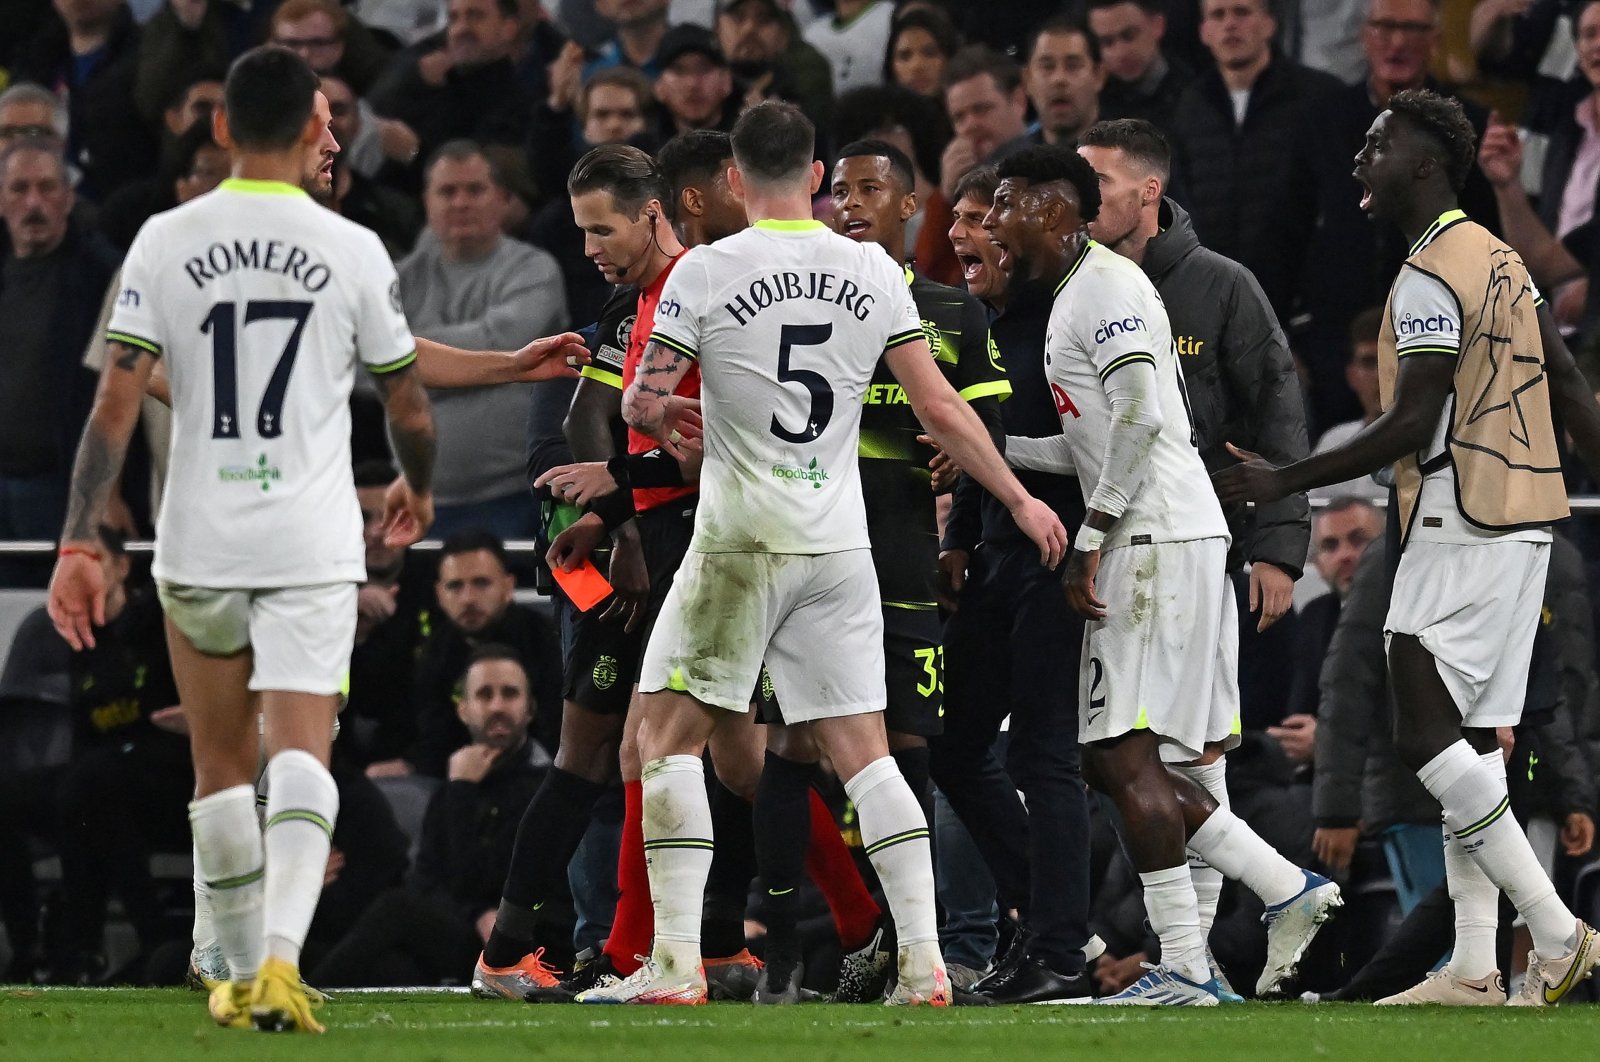 Spurs&#039; coach Antonio Conte (3rd R) reacts after being shown a red card during the UEFA Champions League group D football match between Tottenham Hotspur and Sporting Lisbon at the Tottenham Hotspur Stadium, London, Oct. 26, 2022. (AFP Photo)